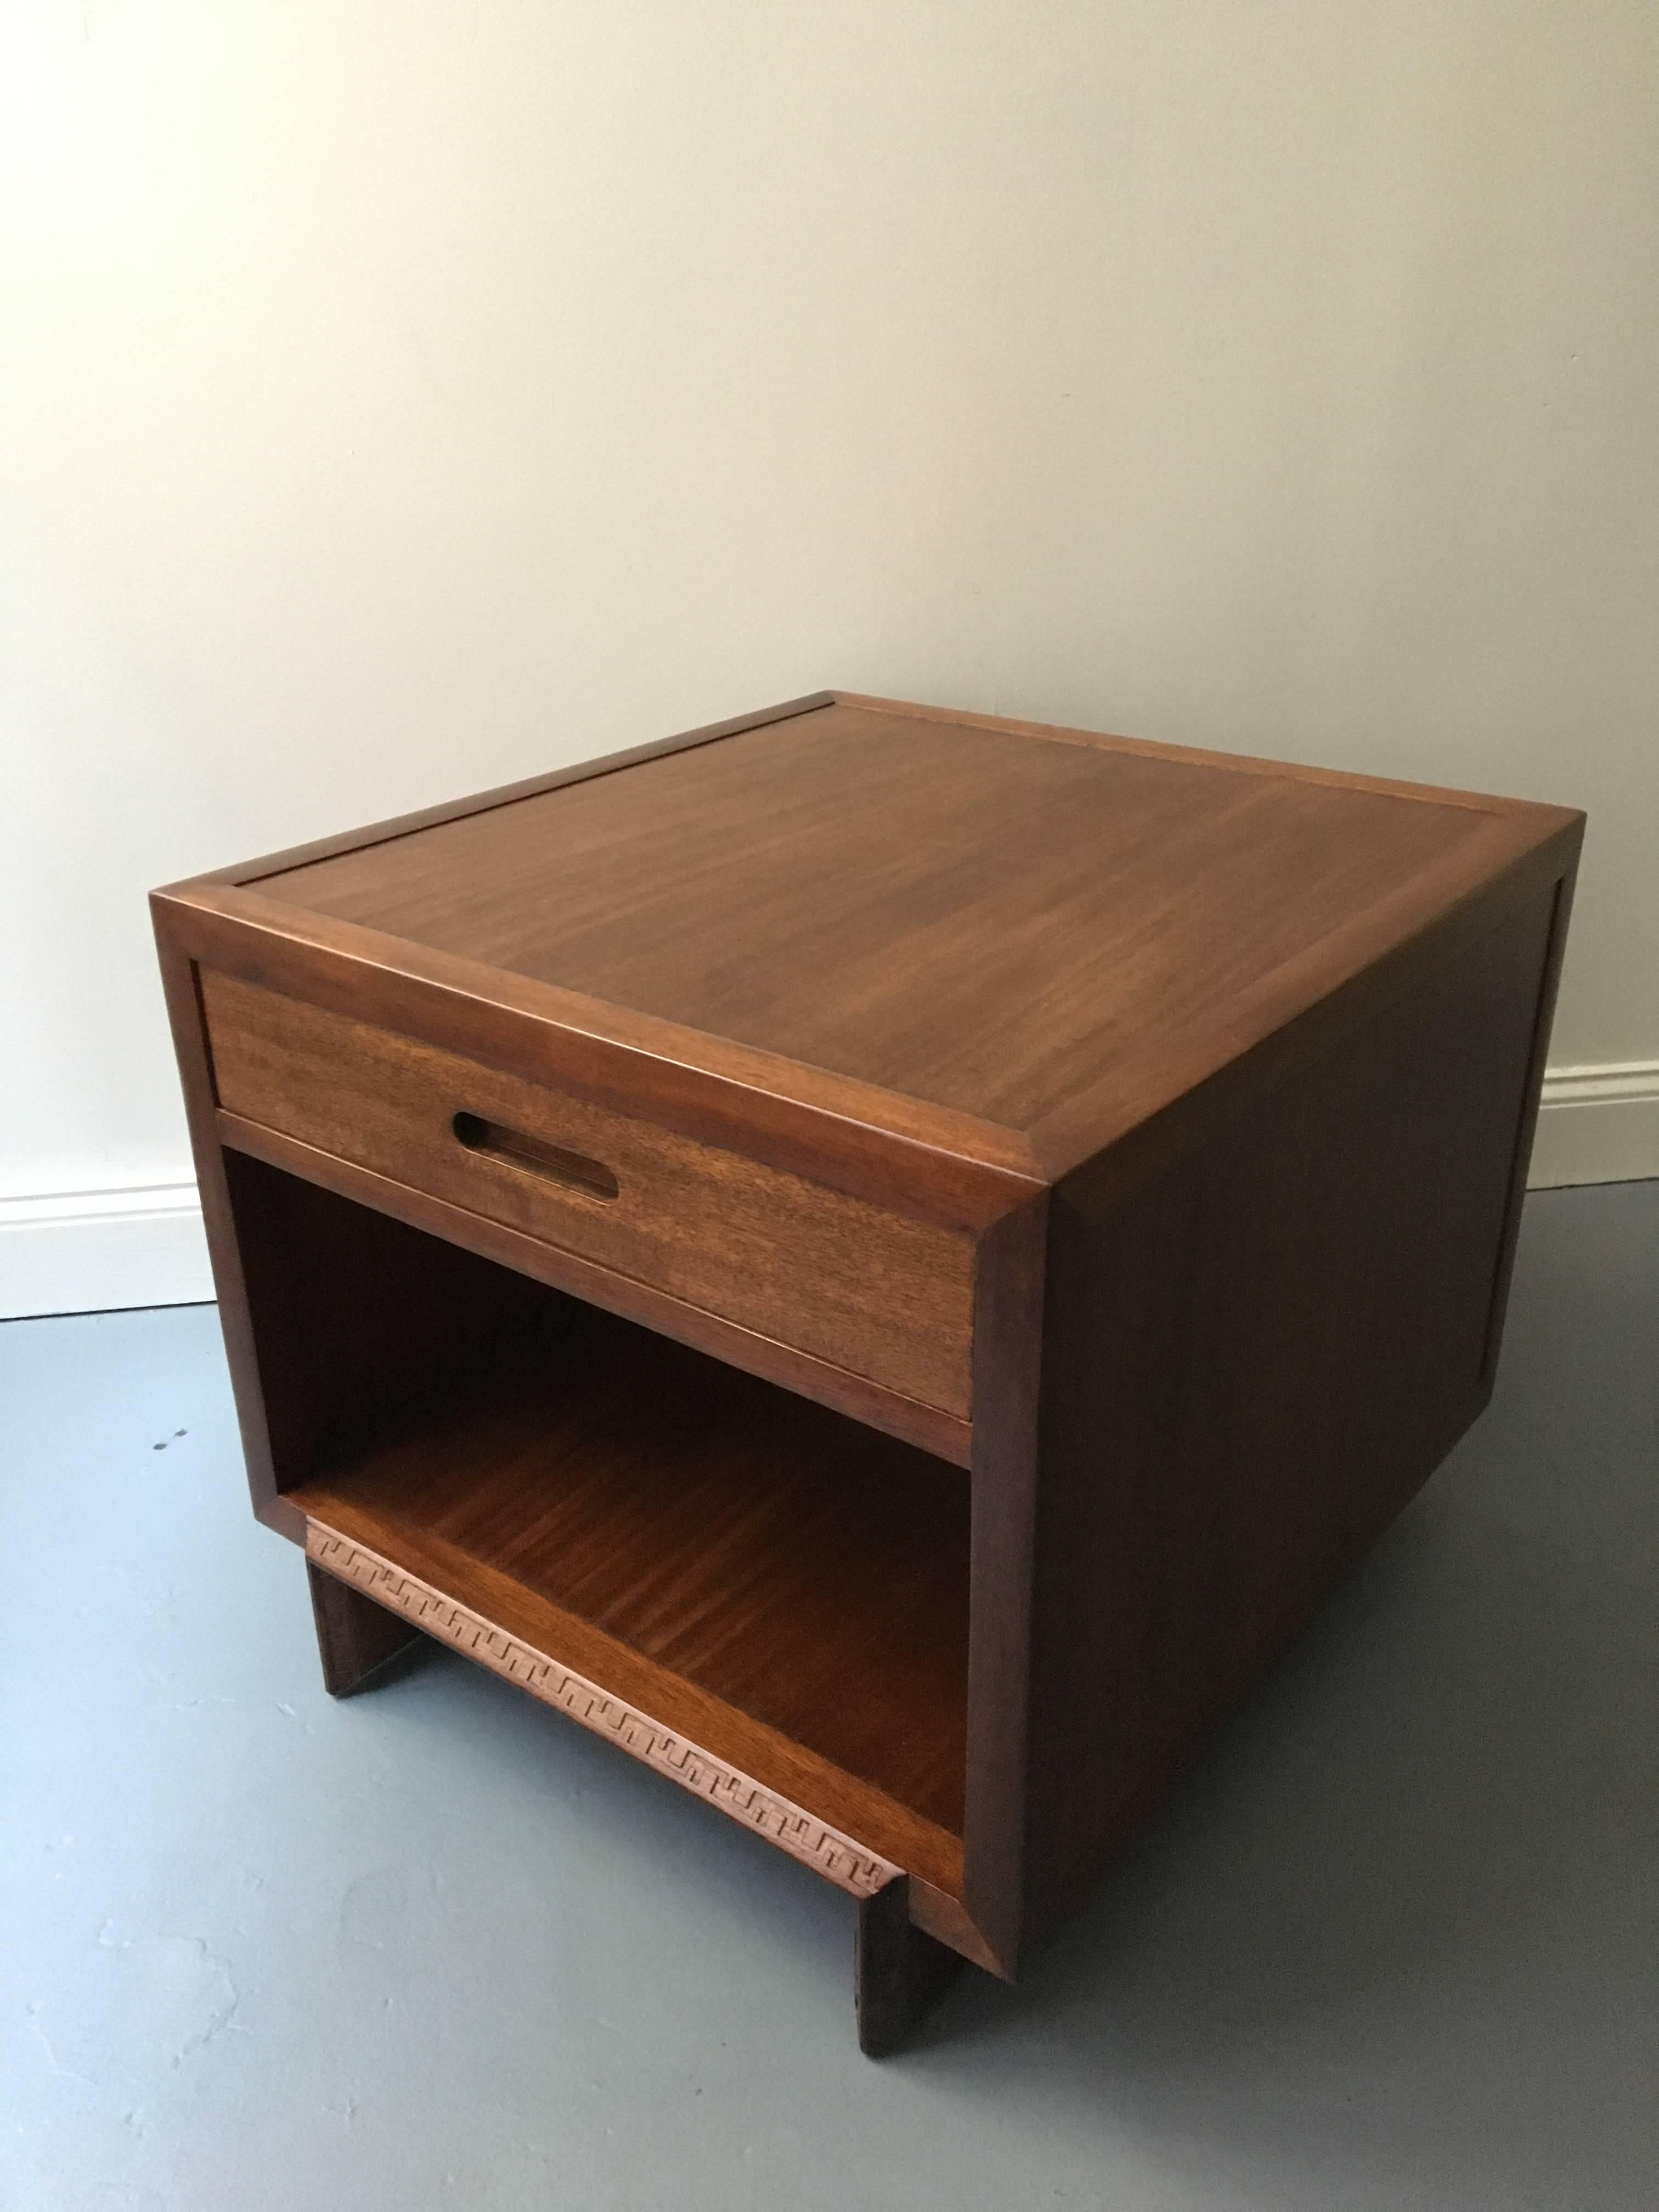 A low table in mahogany made in 1955 by Frank Lloyd Wright. Part of a series of furniture produced by Heritage Henredon. Perfectly proportioned table with internal drawer.